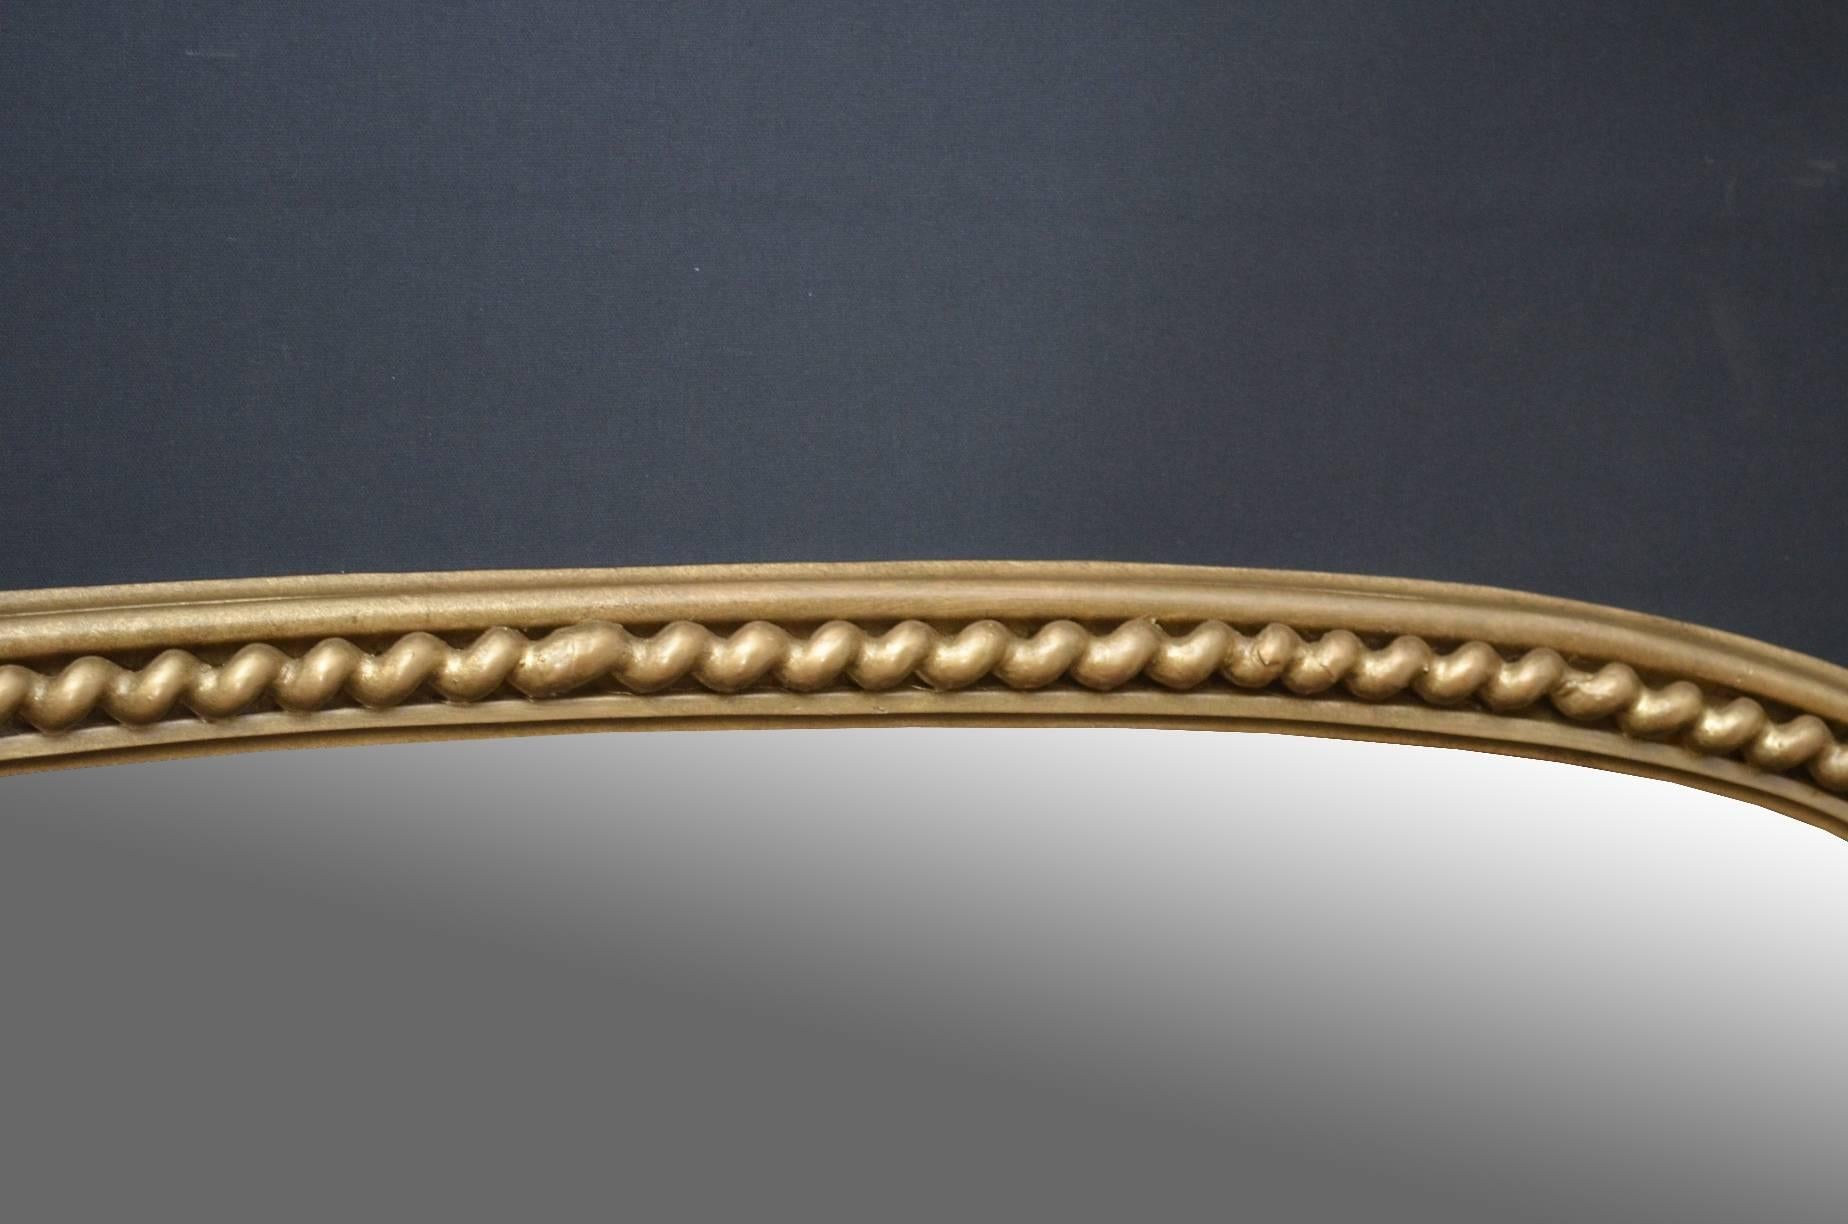 K0103, Excellent English, Victorian gilt mirror, having arched mirror plate in moulded frame with twisted rope decoration and fine scroll carvings to sides. This Victorian over mantle wall mirror has been refinished in the past and is in wonderful